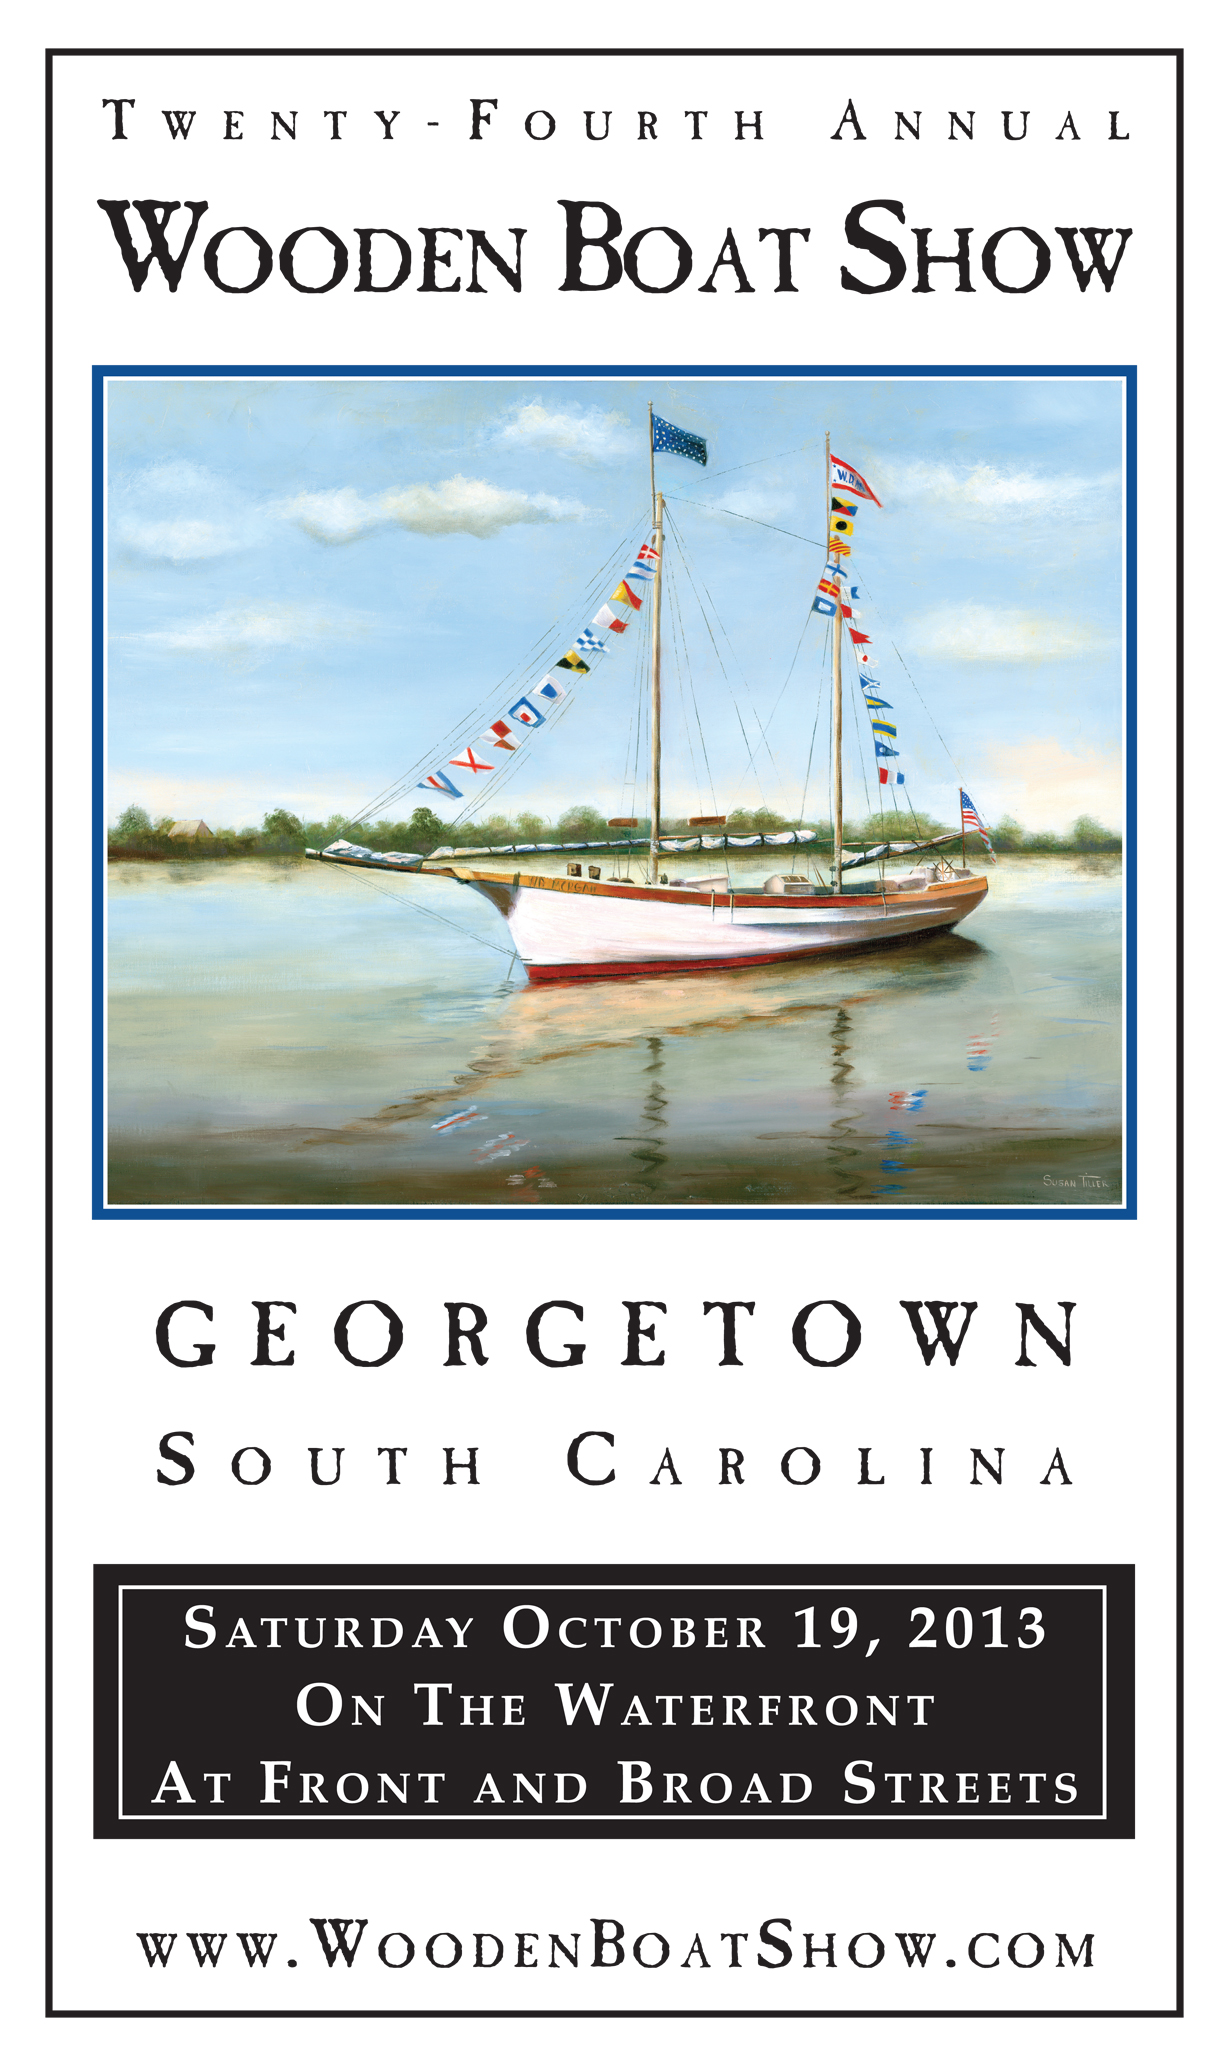 Past Boat Show Posters Georgetown Wooden Boat Show Georgetown, SC